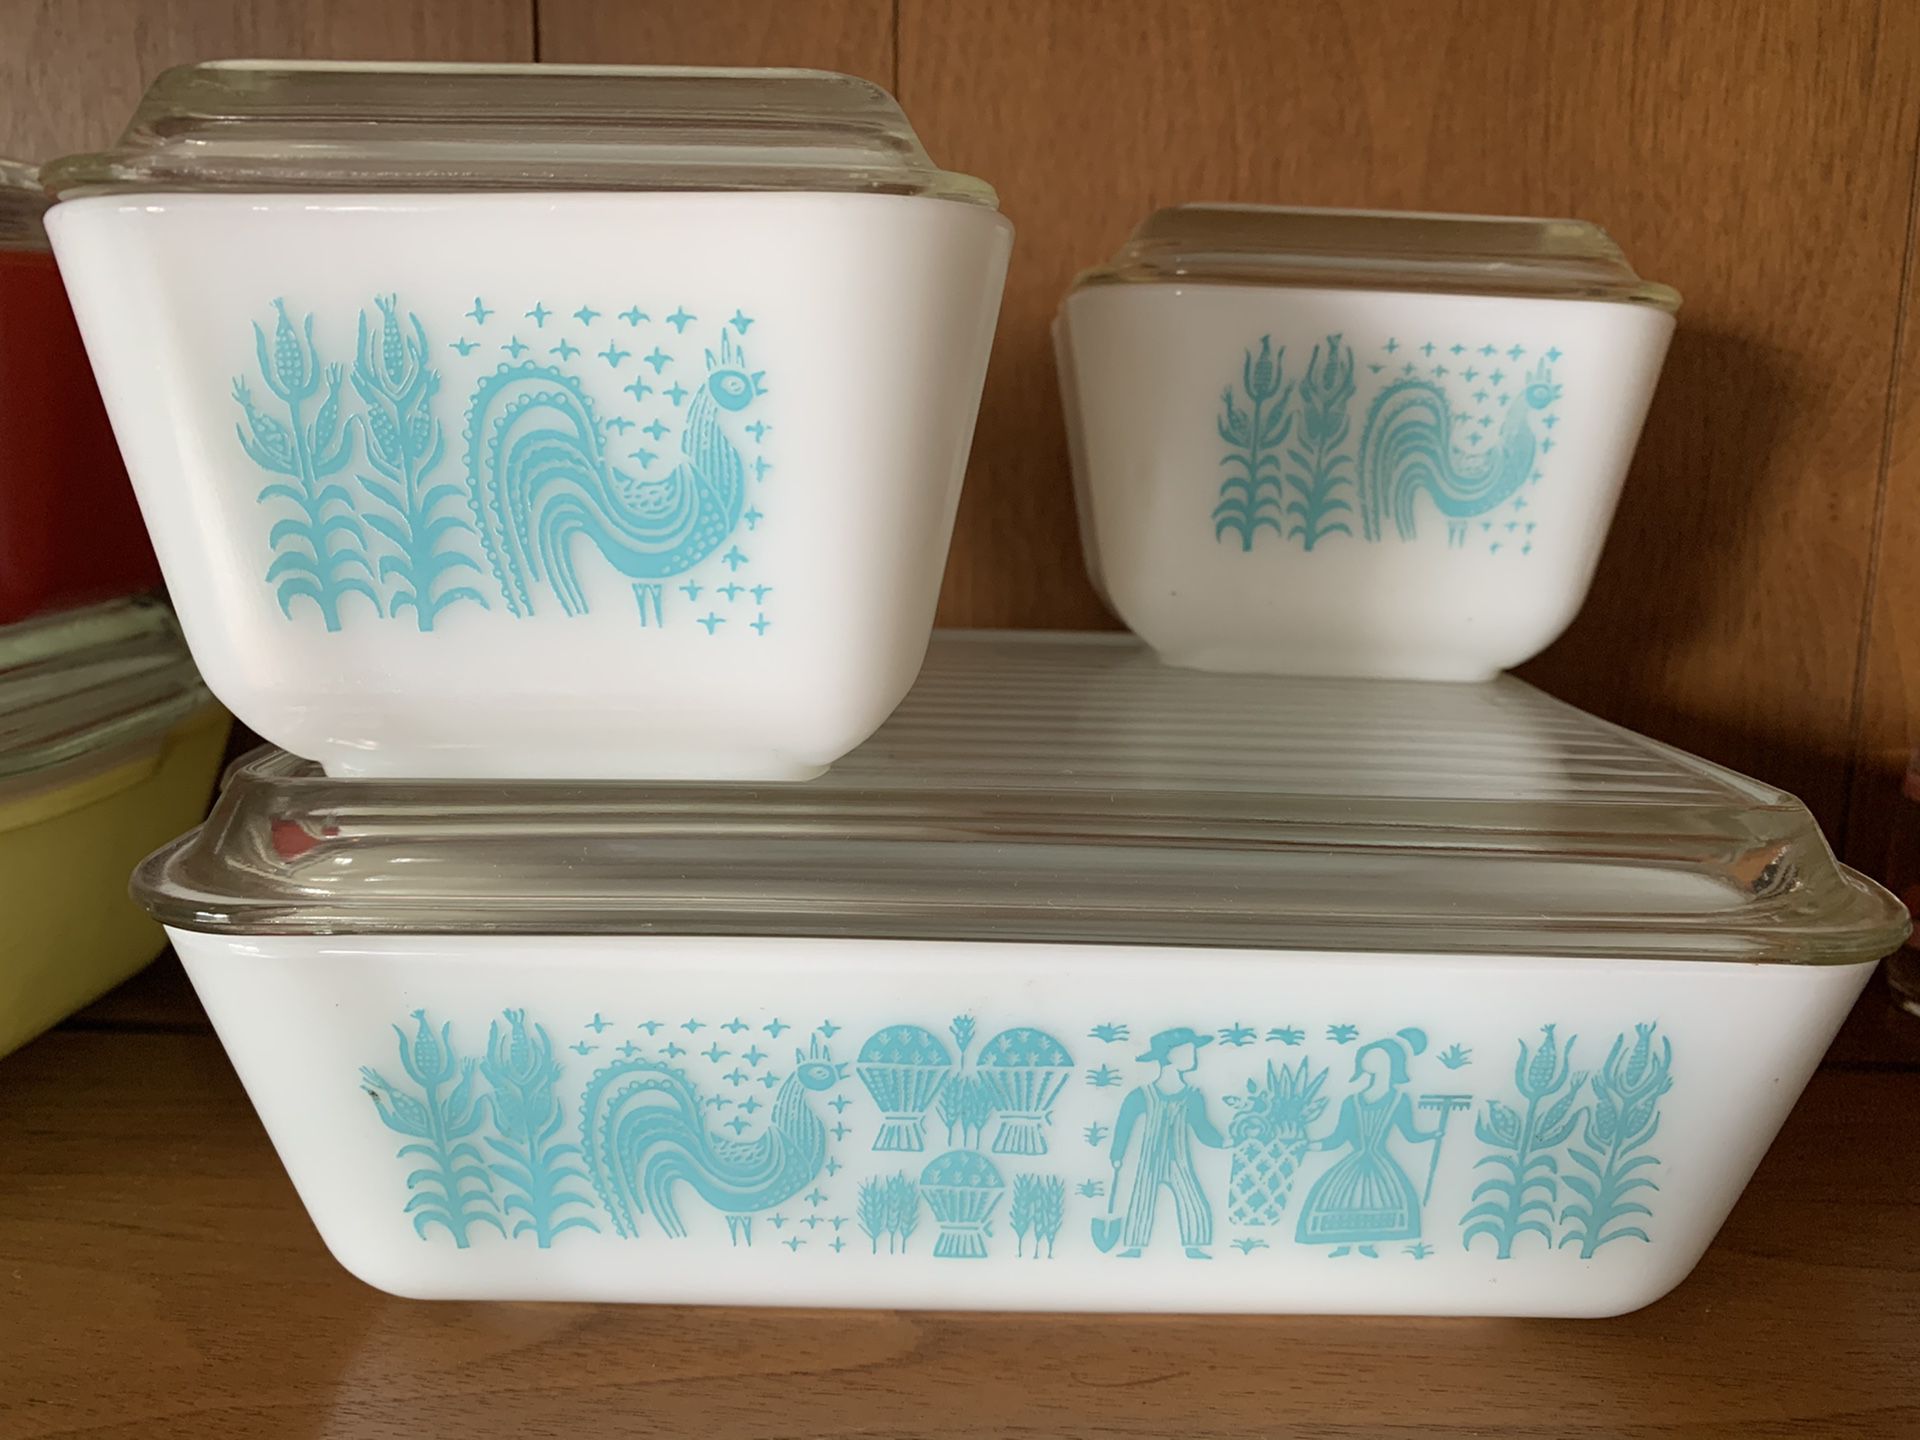 Vintage Pyrex Amish Butterprint Refrigerator Dishes Turquoise White